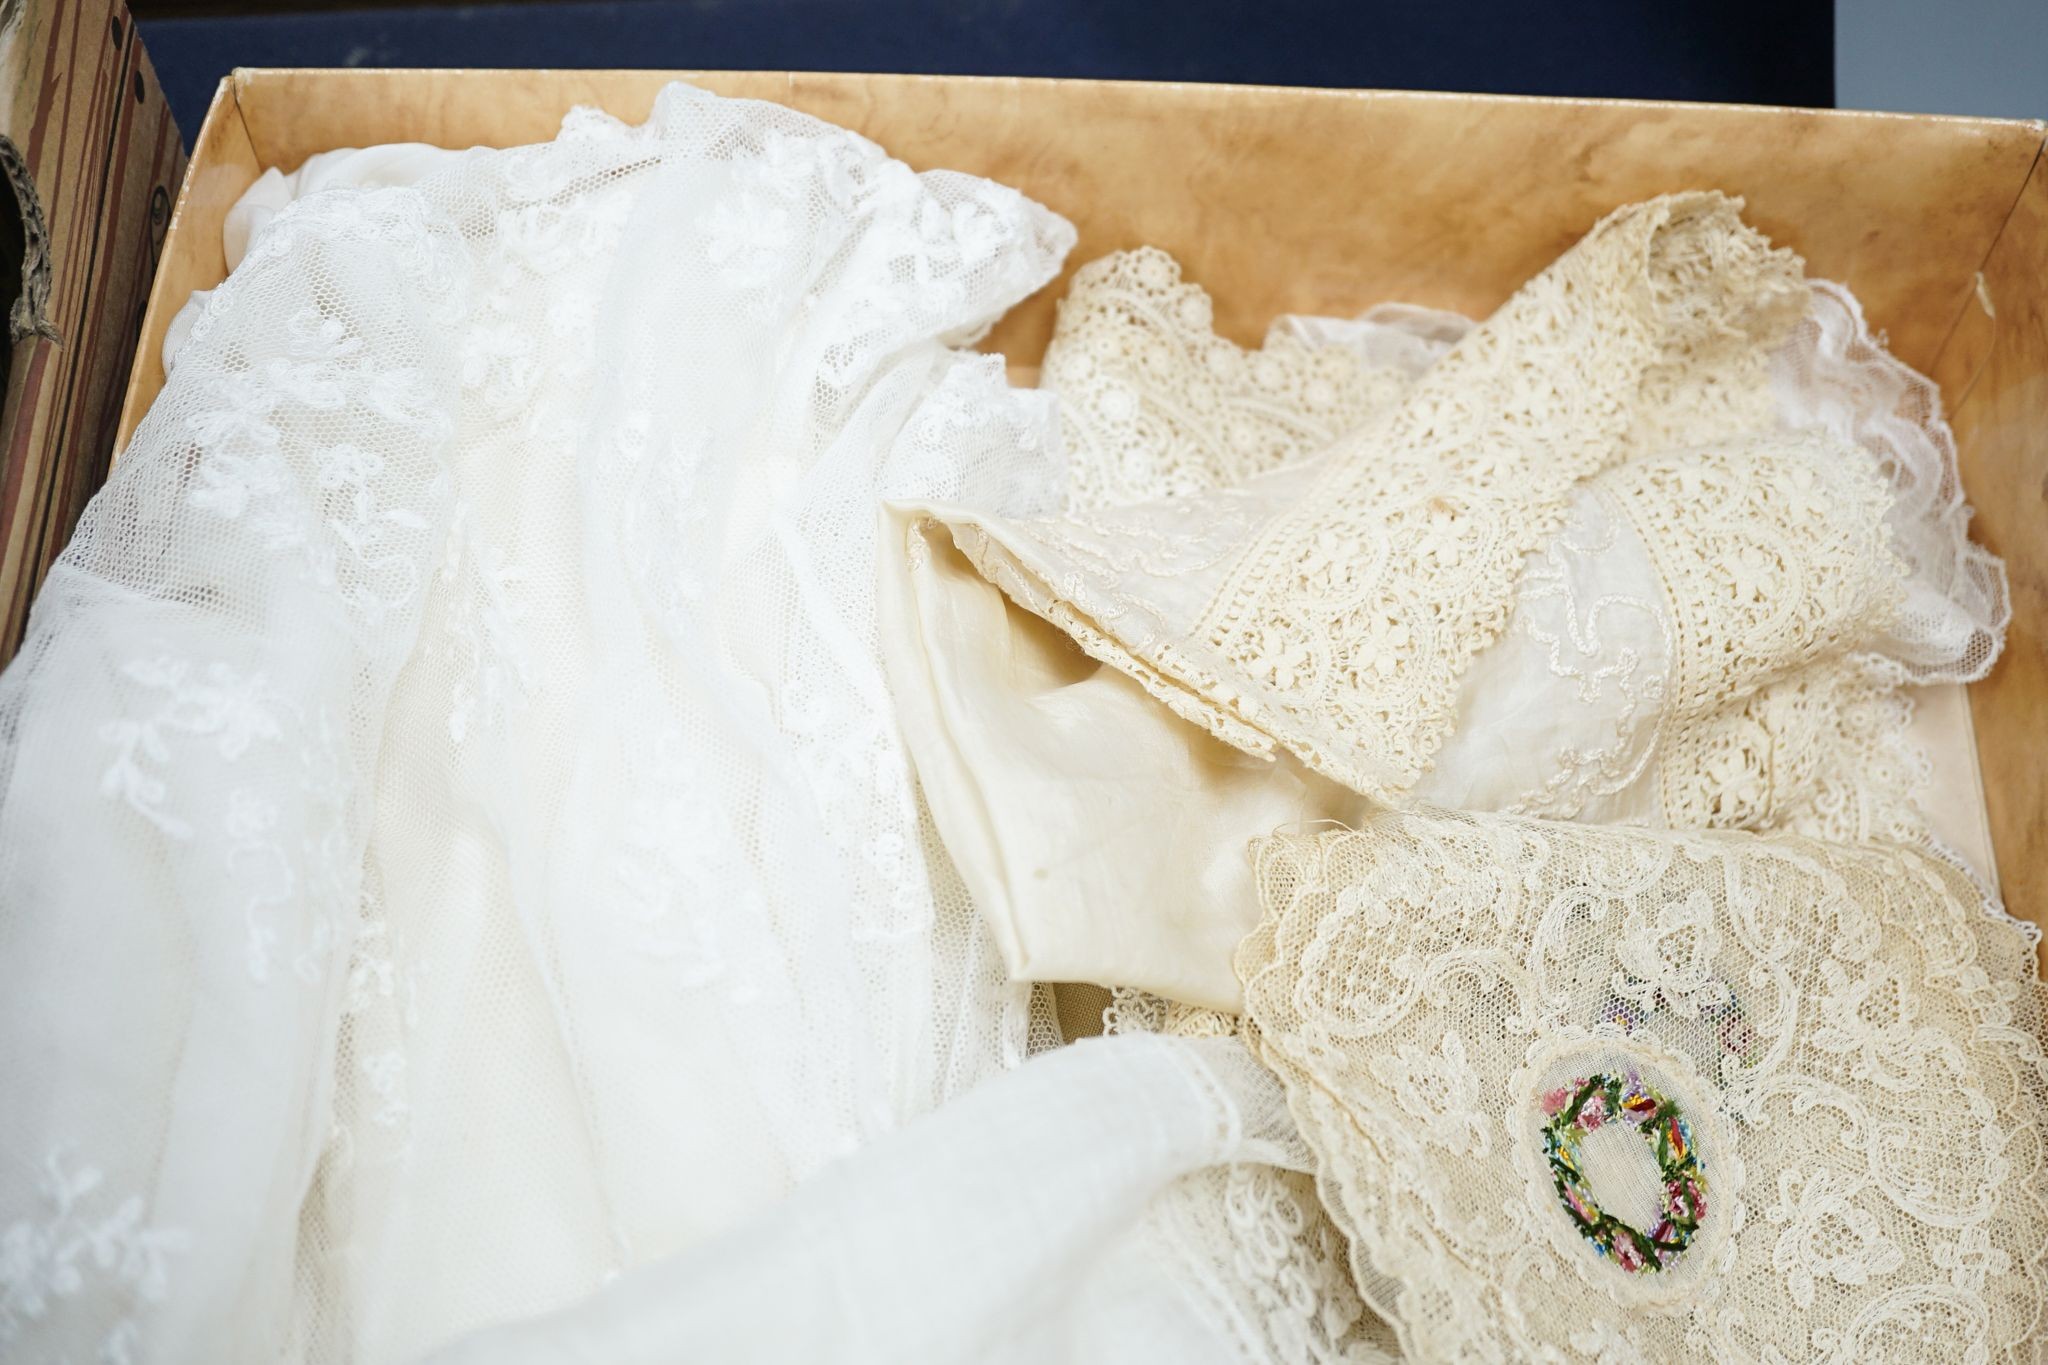 Two early 19th century, finely white worked lace hankies, various sets of lace mats and a lace - Image 2 of 5